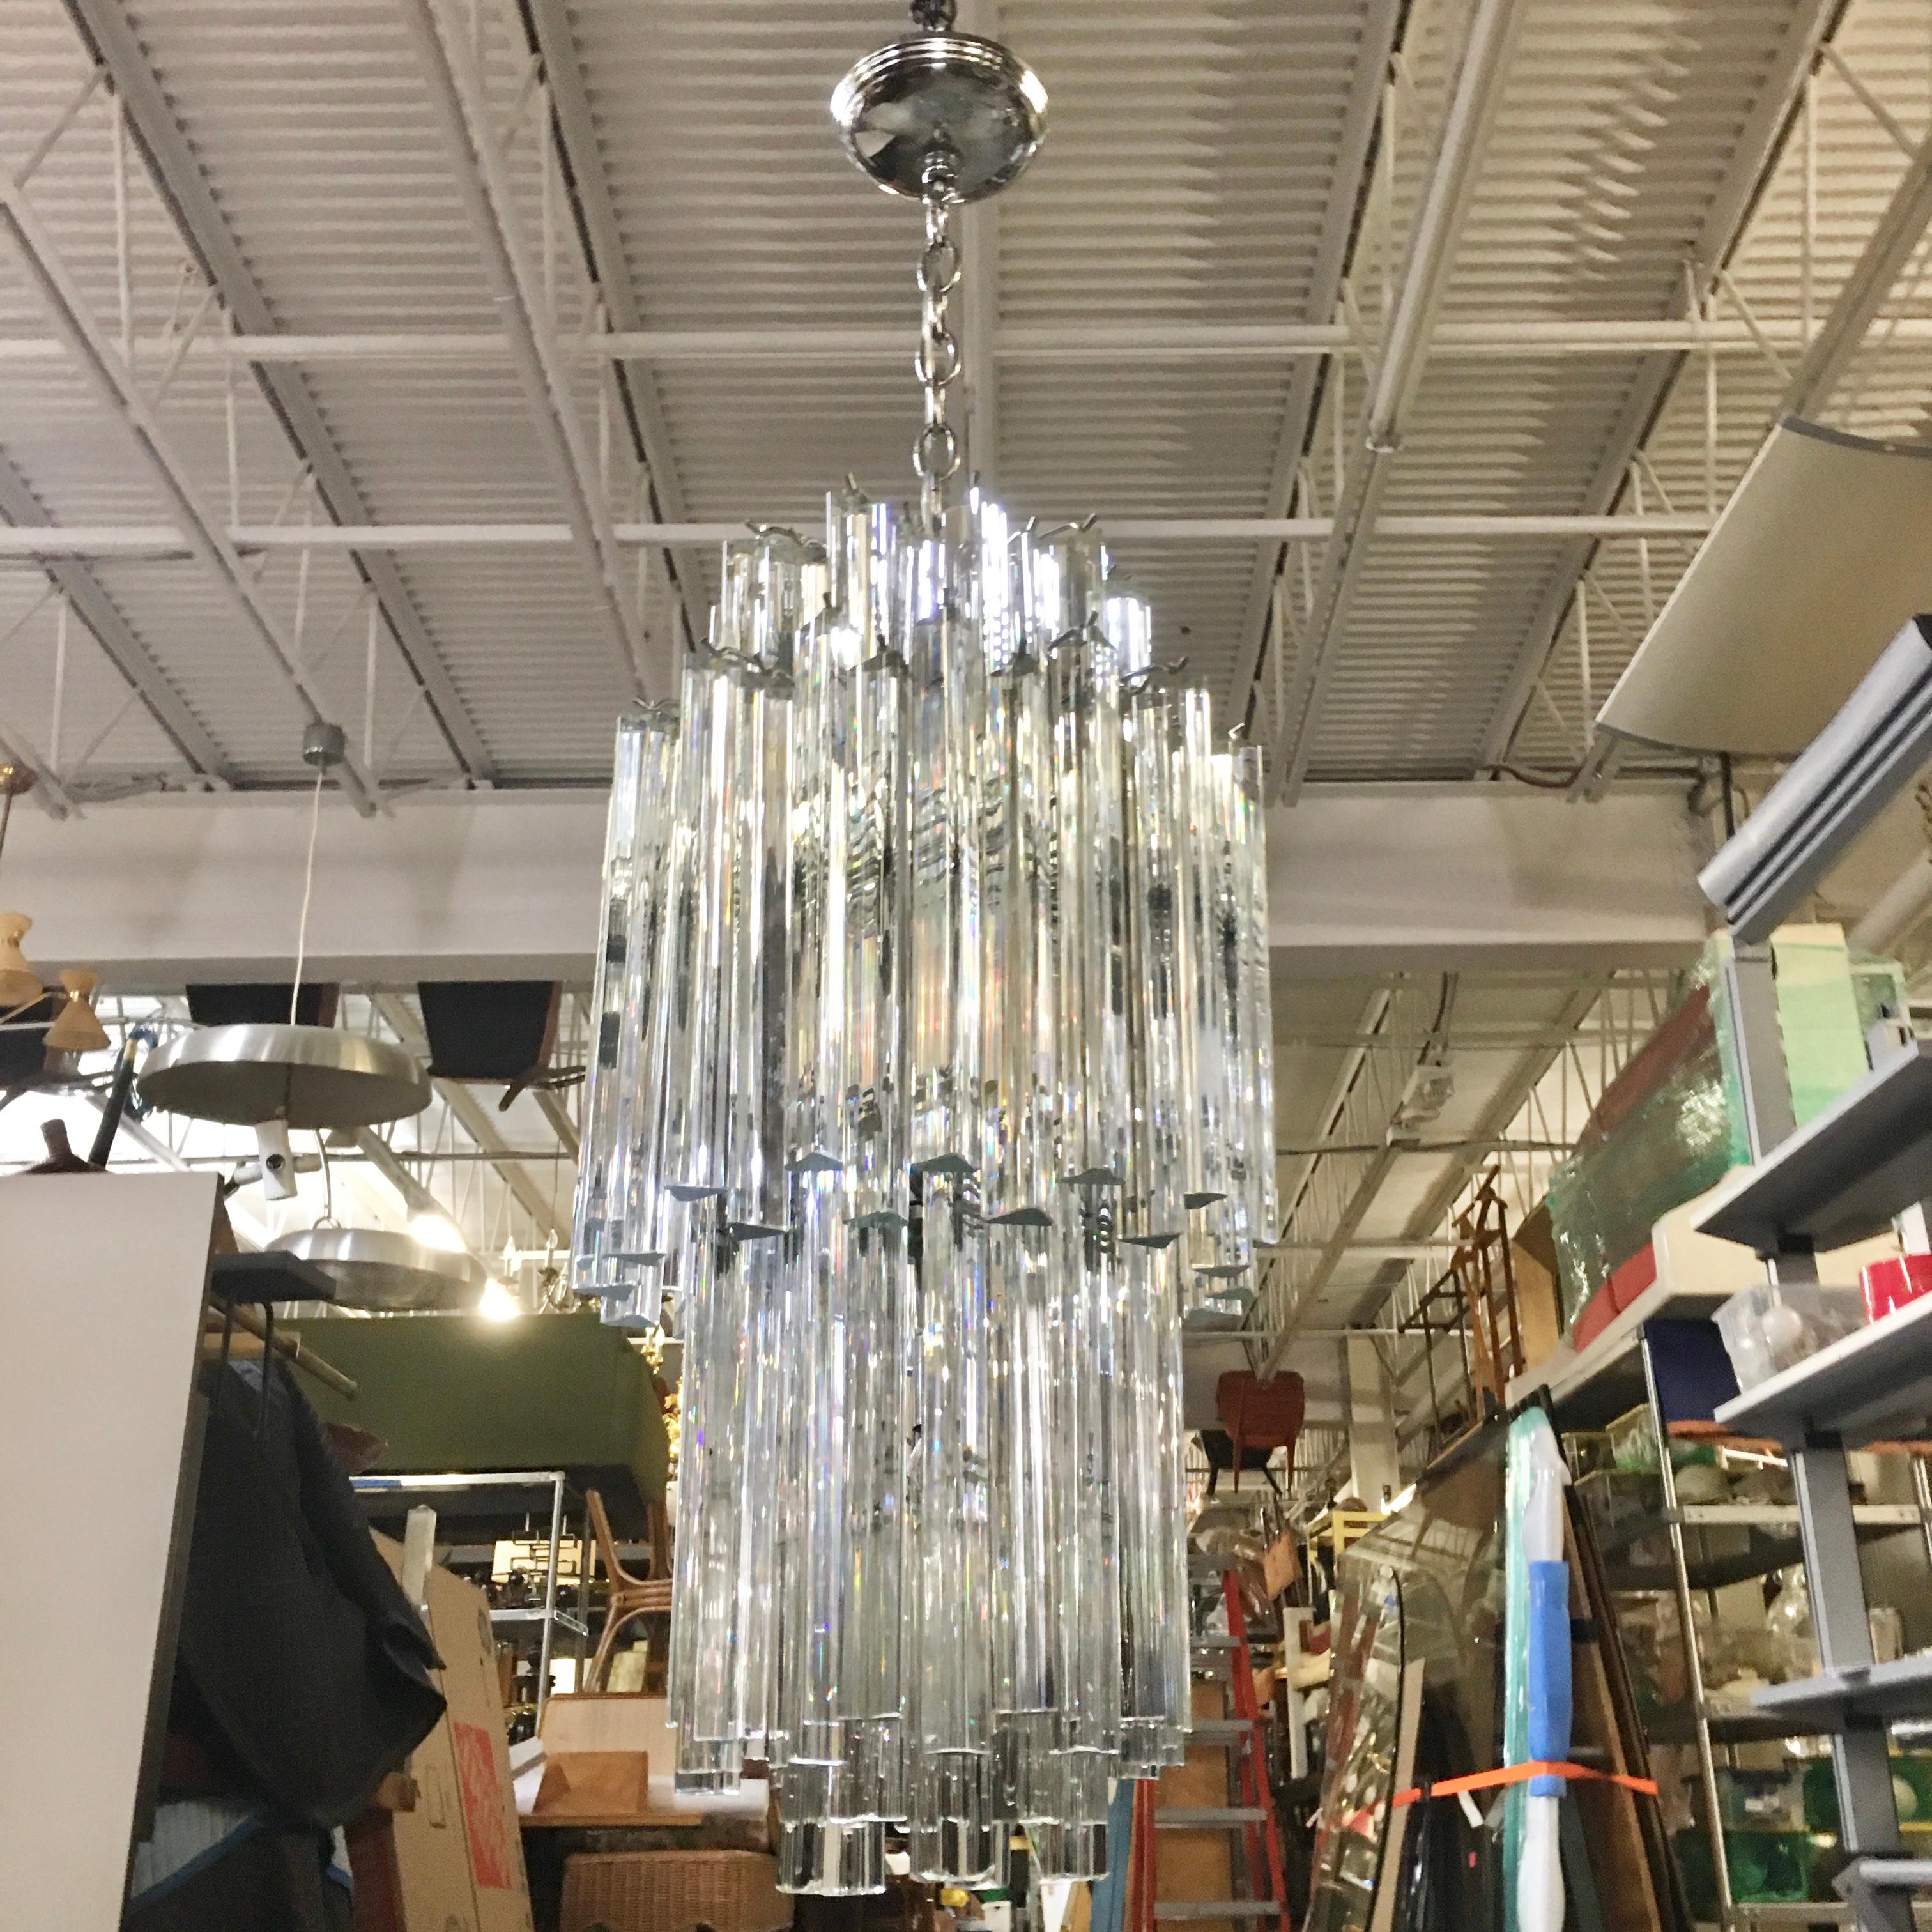 Vintage 1970s four-tier chandelier imported by Camer Glass after a design by Tony Zucchieri for Venini with crystal trilobi prisms of two different lengths (11 inches and 6 inches) hung from a round chromed steel skeletal frame.
Frame is